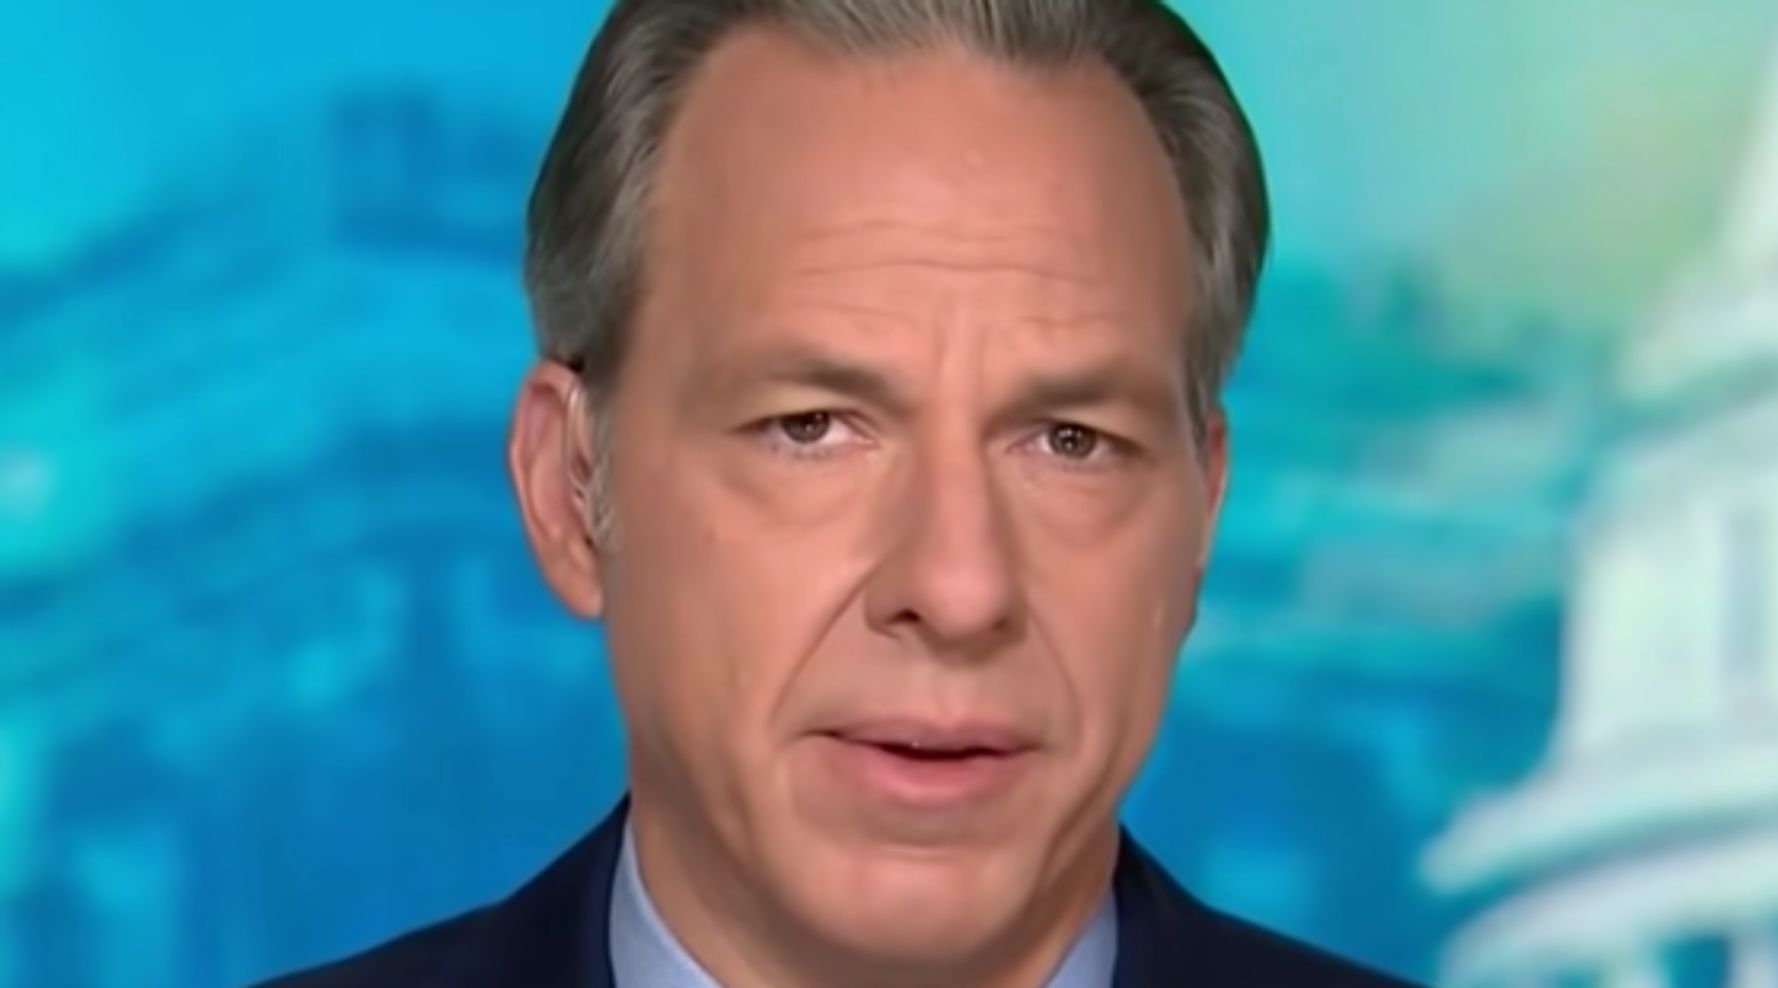 Jake Tapper Issues Stark Warning About What To Expect From Donald Trump In Next 11 날